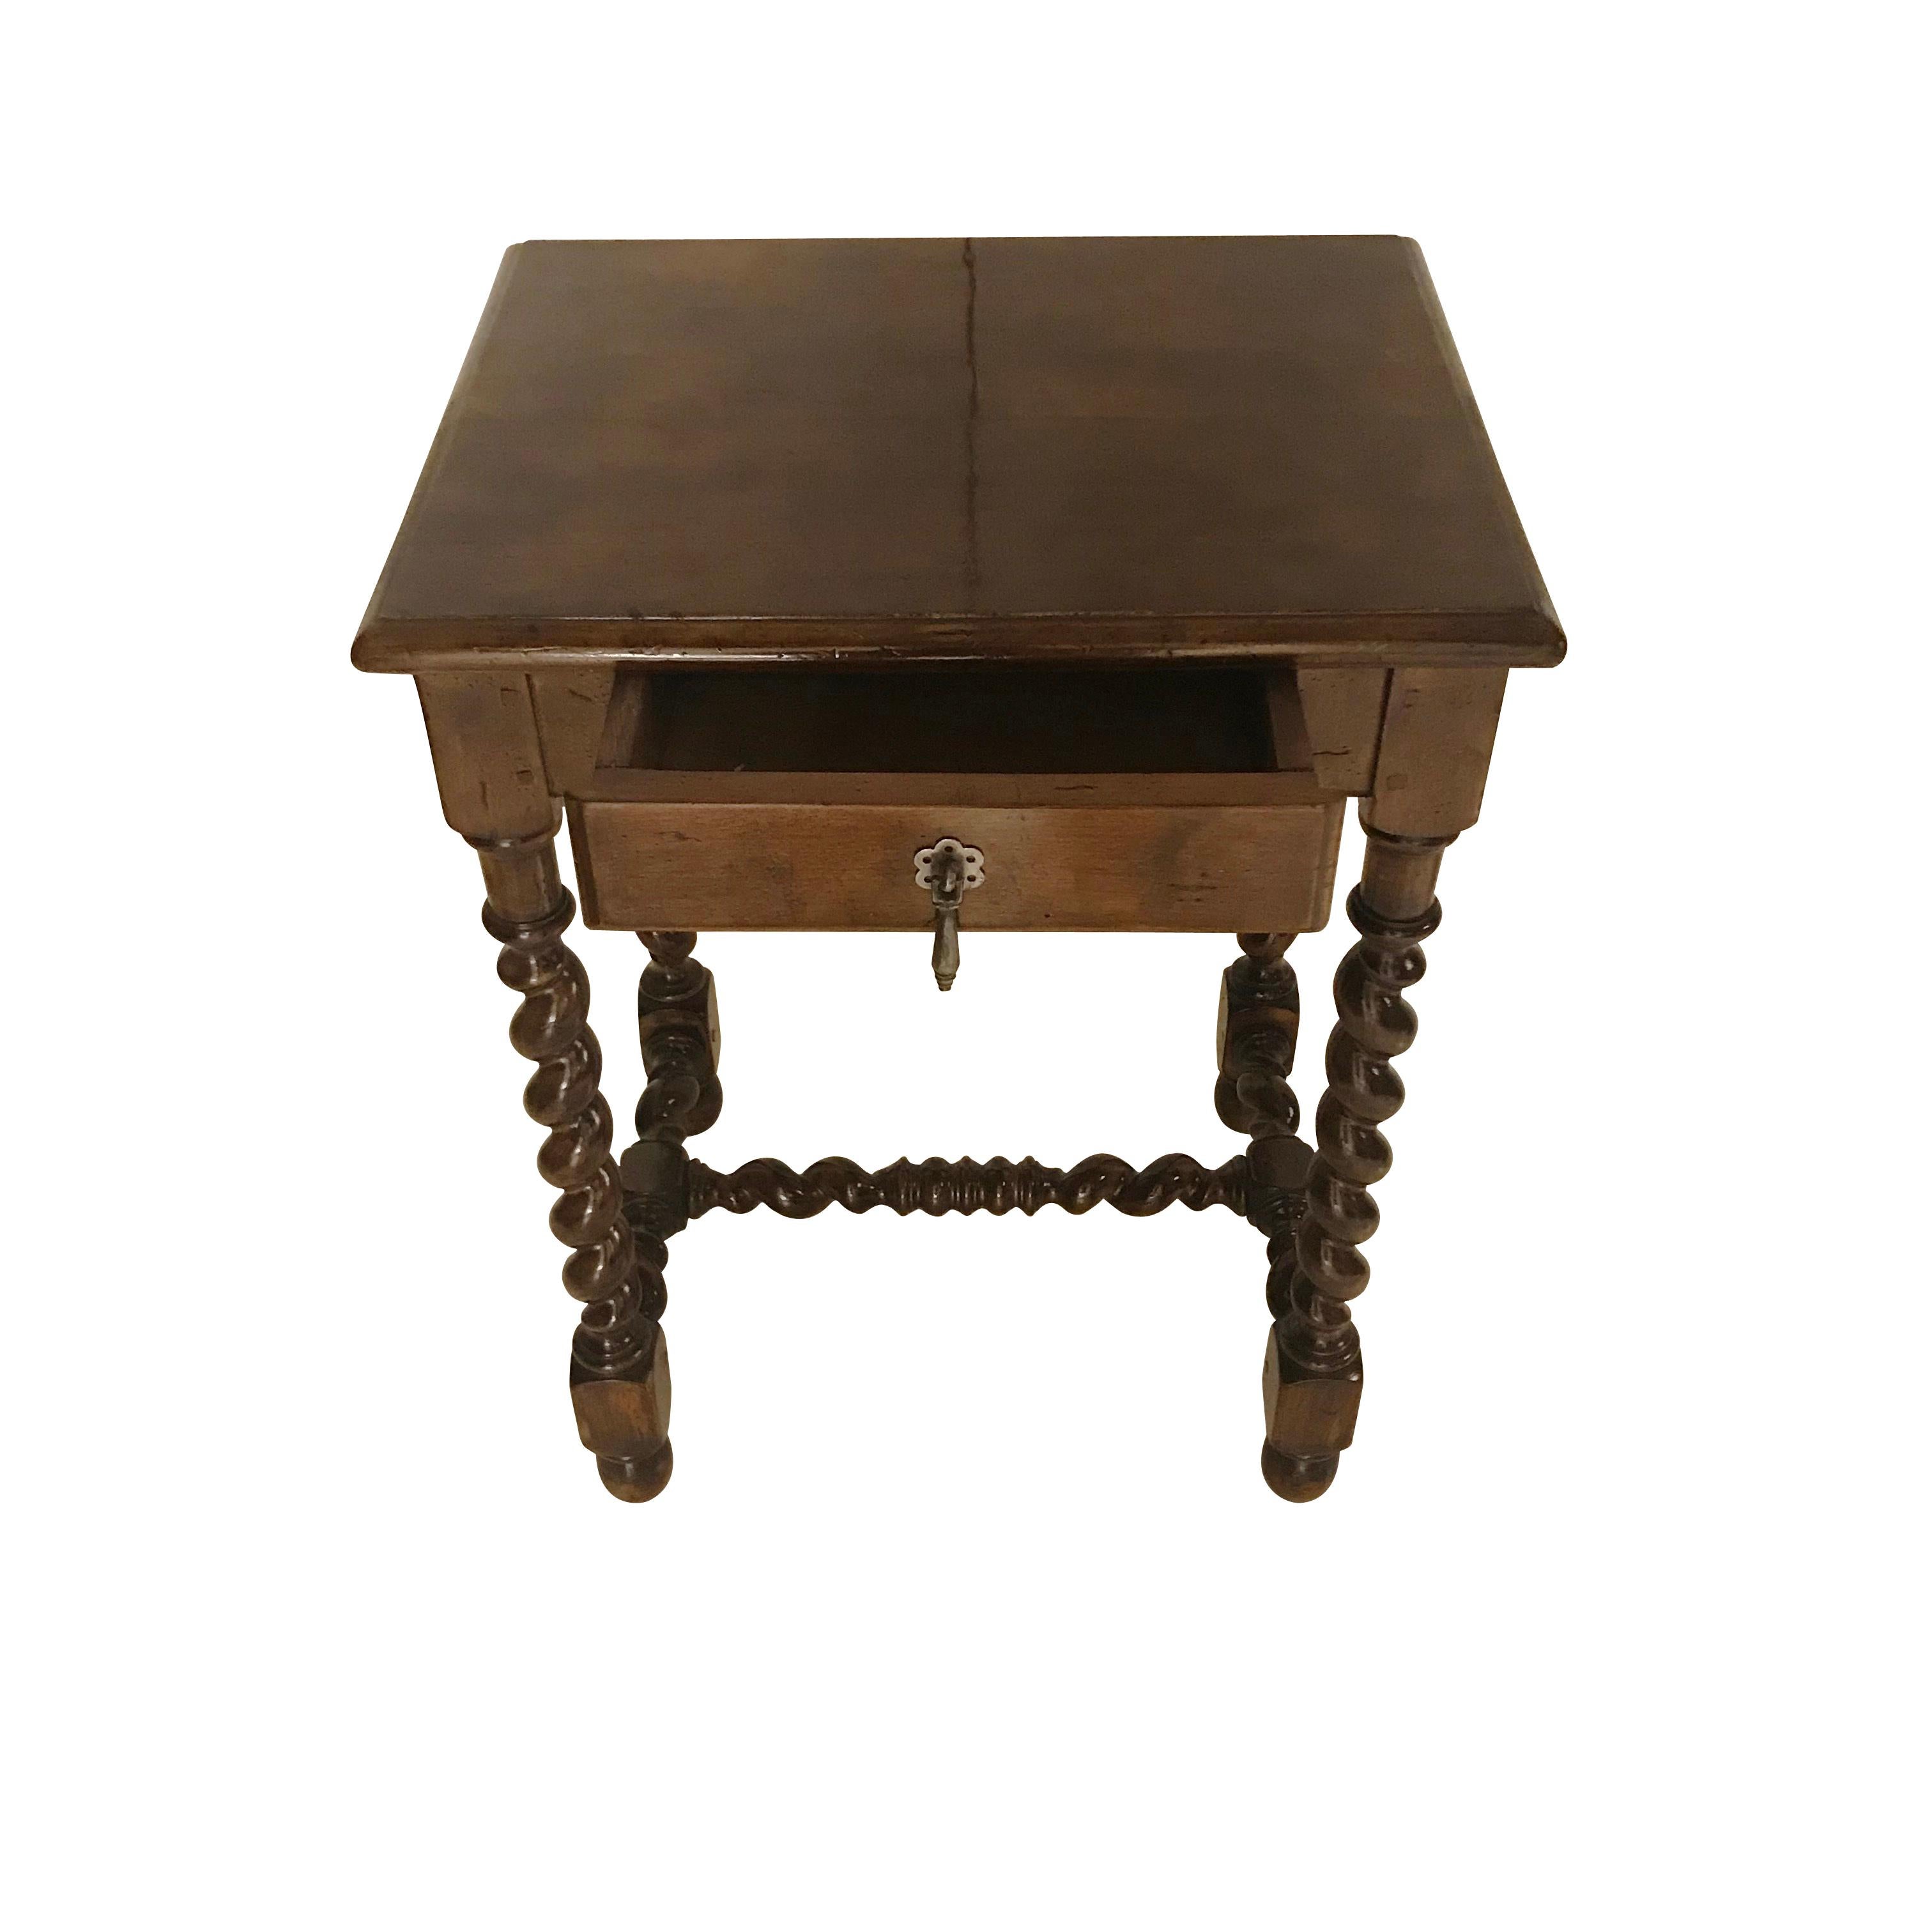 19th century French classic 19th century French walnut side table with single center drawer.
Traditional turned legs.
